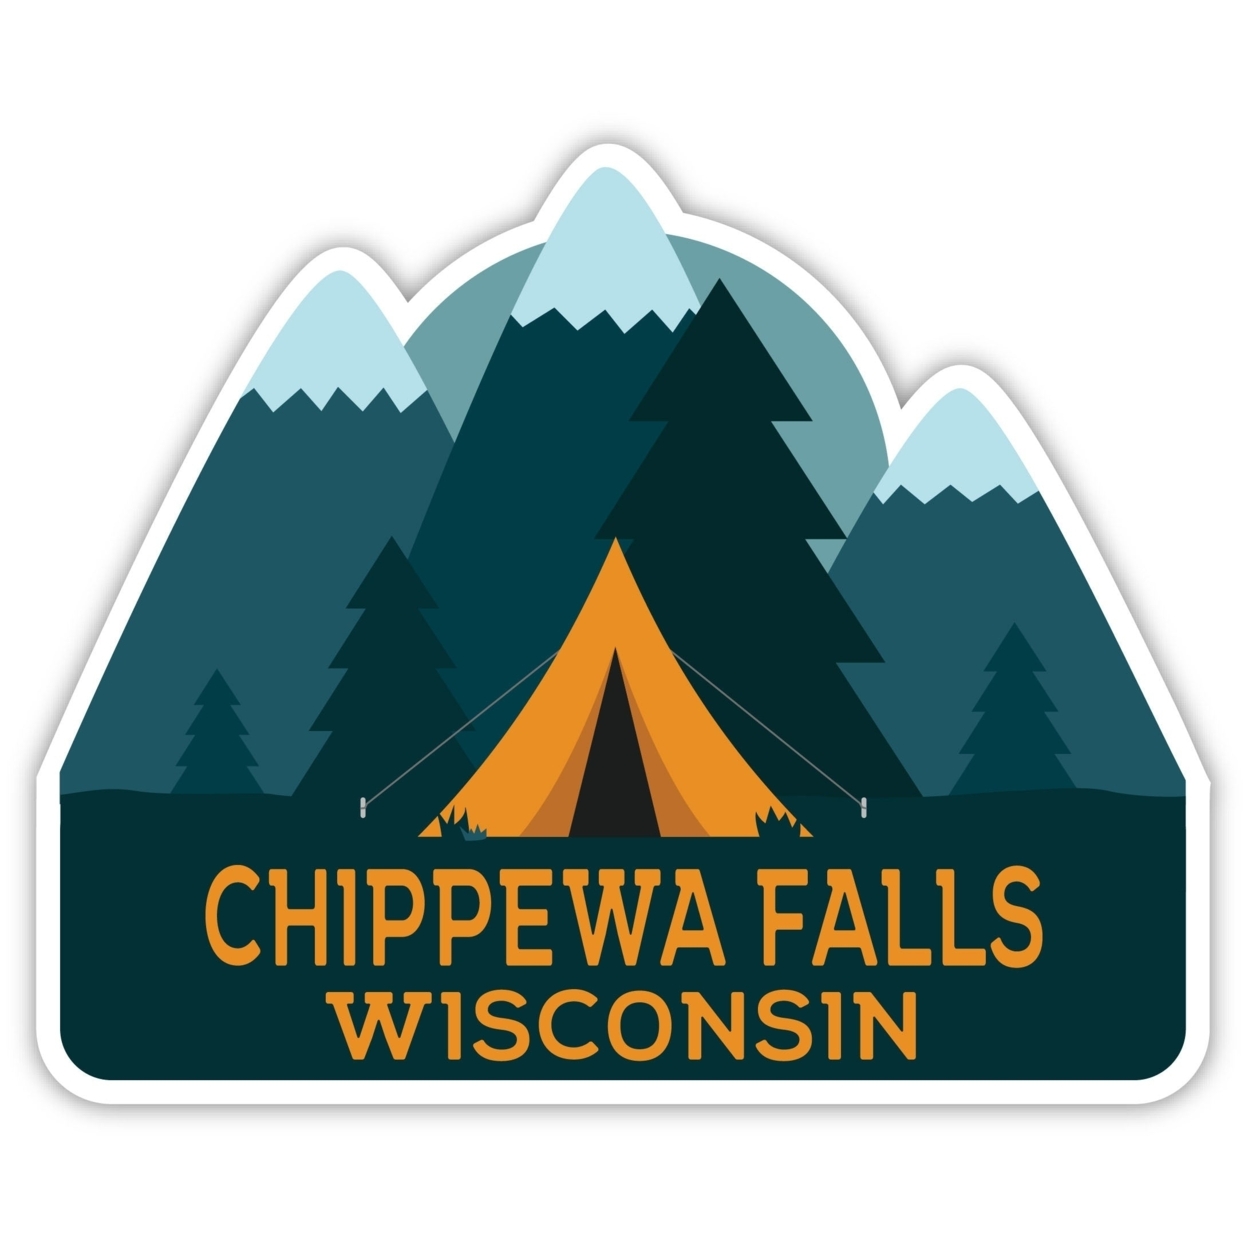 Chippewa Falls Wisconsin Souvenir Decorative Stickers (Choose Theme And Size) - 4-Pack, 2-Inch, Tent